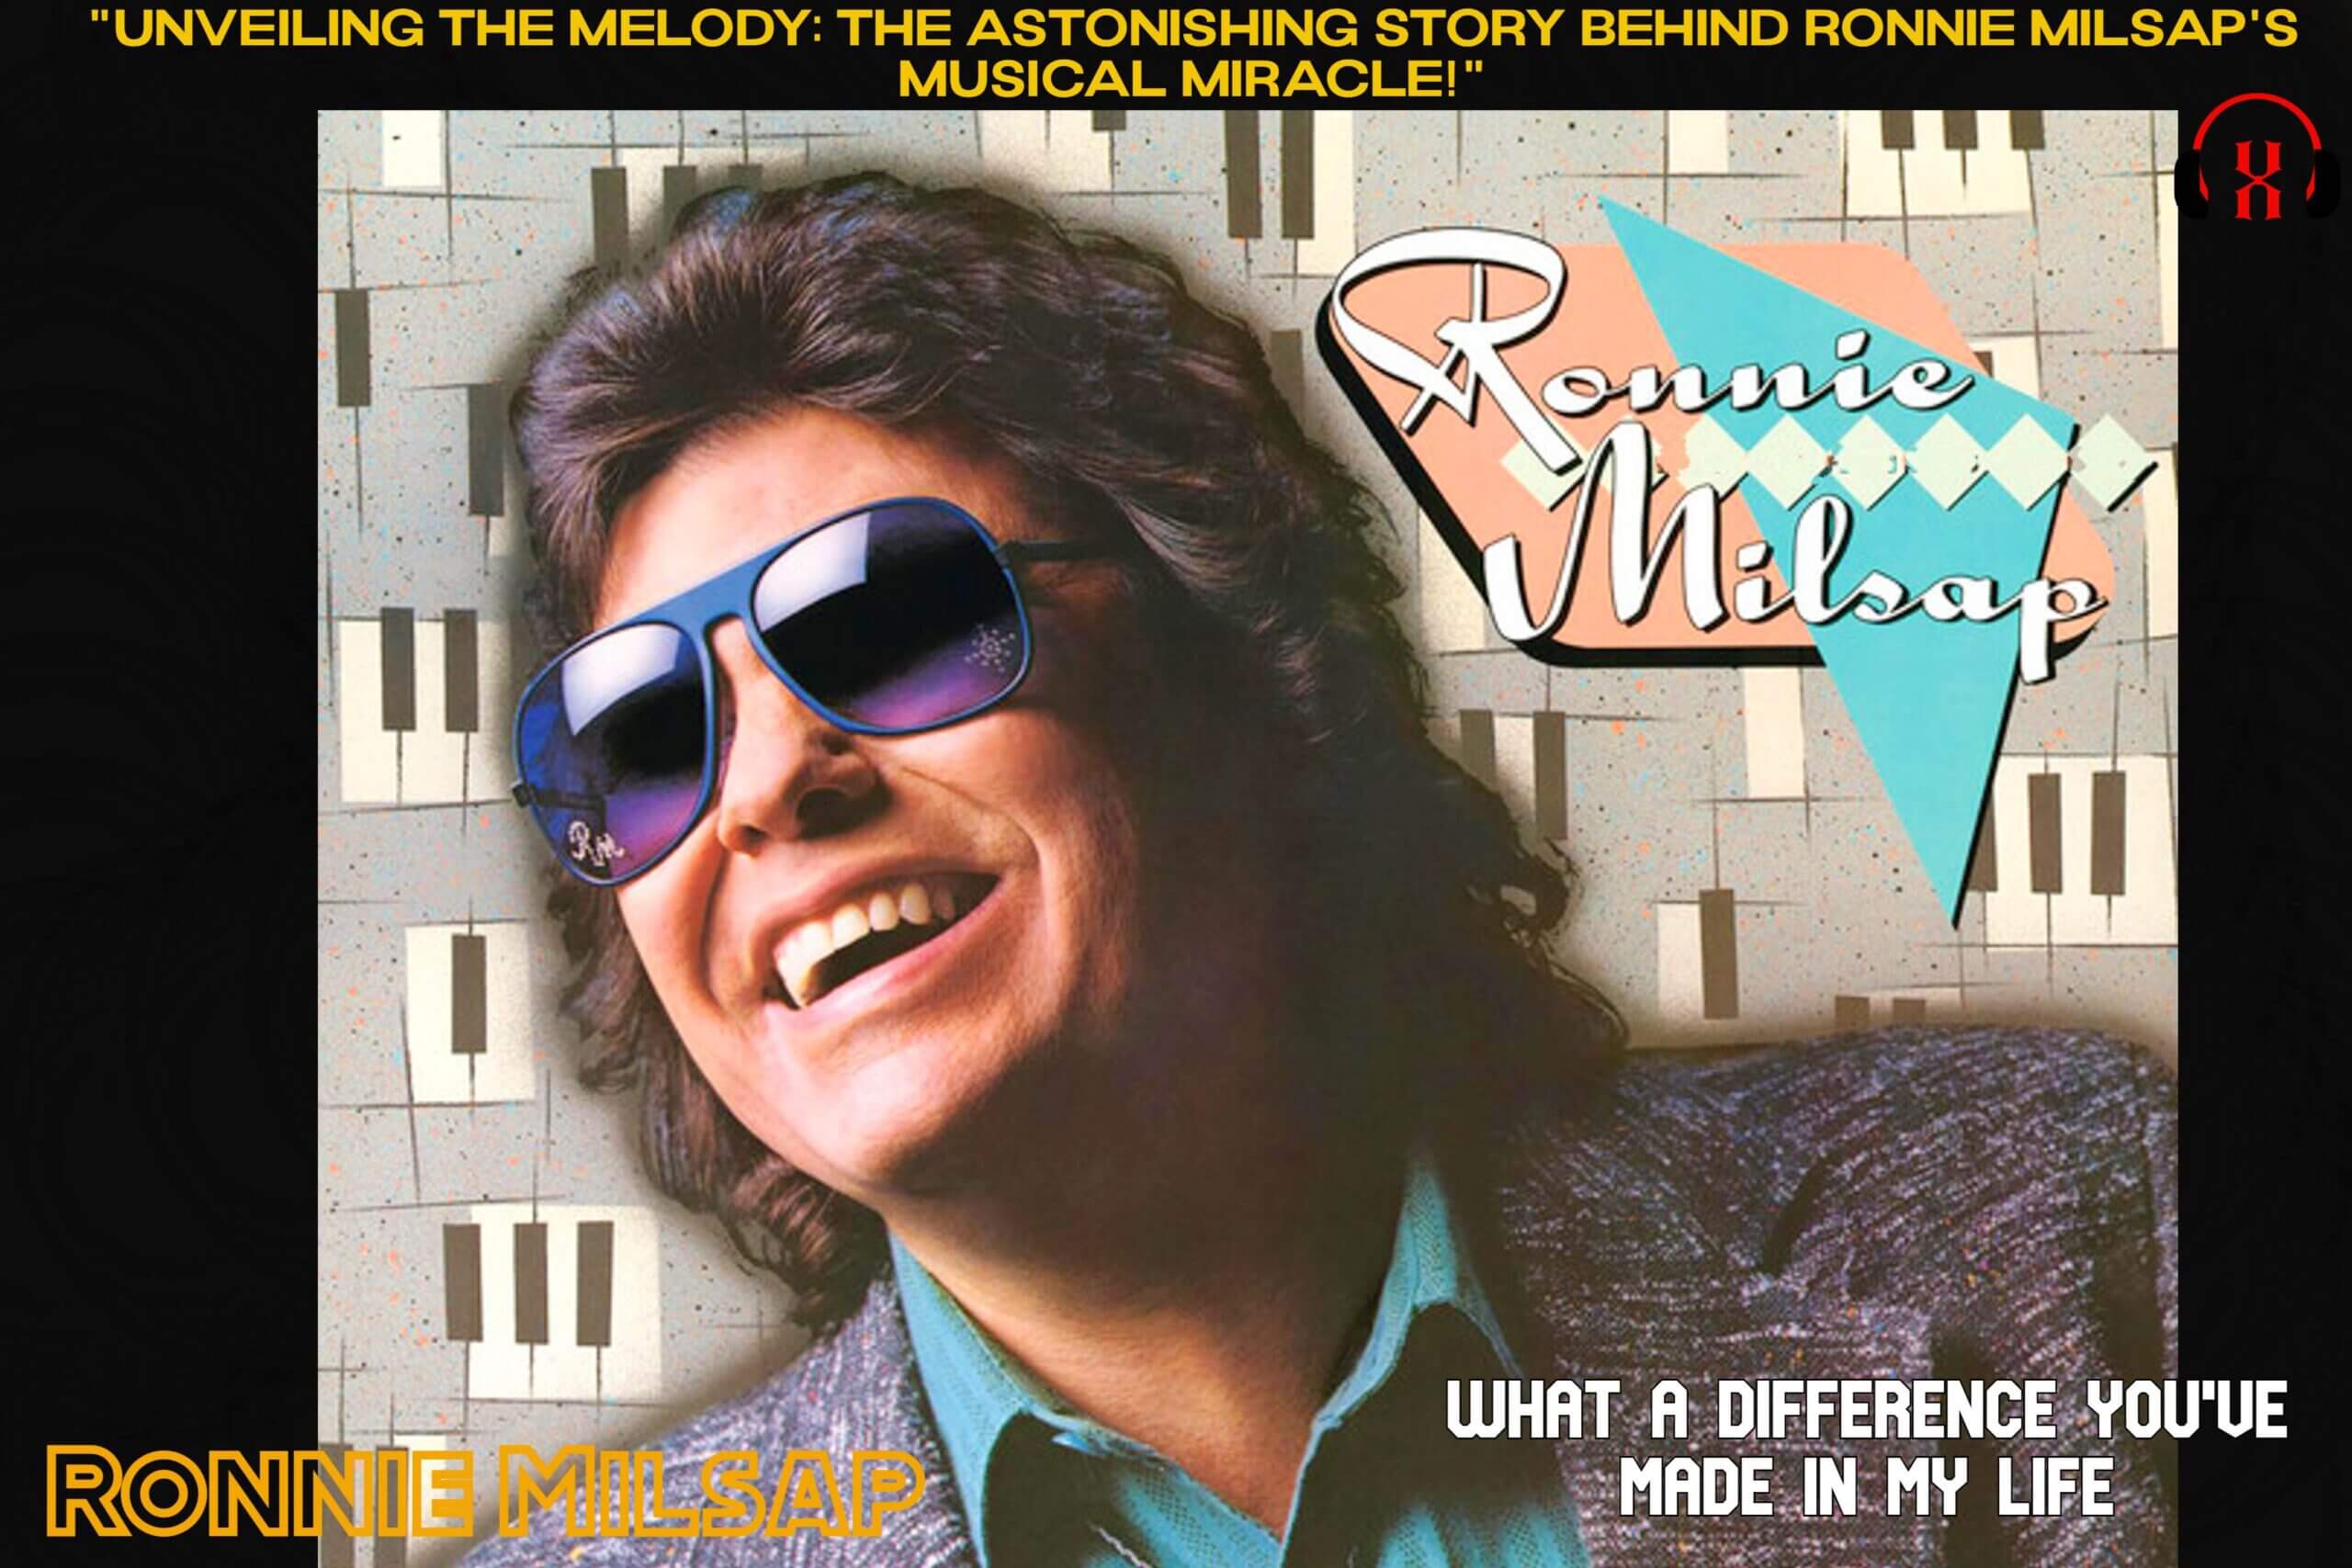 “Unveiling the Melody: The Astonishing Story Behind Ronnie Milsap’s Musical Miracle!”